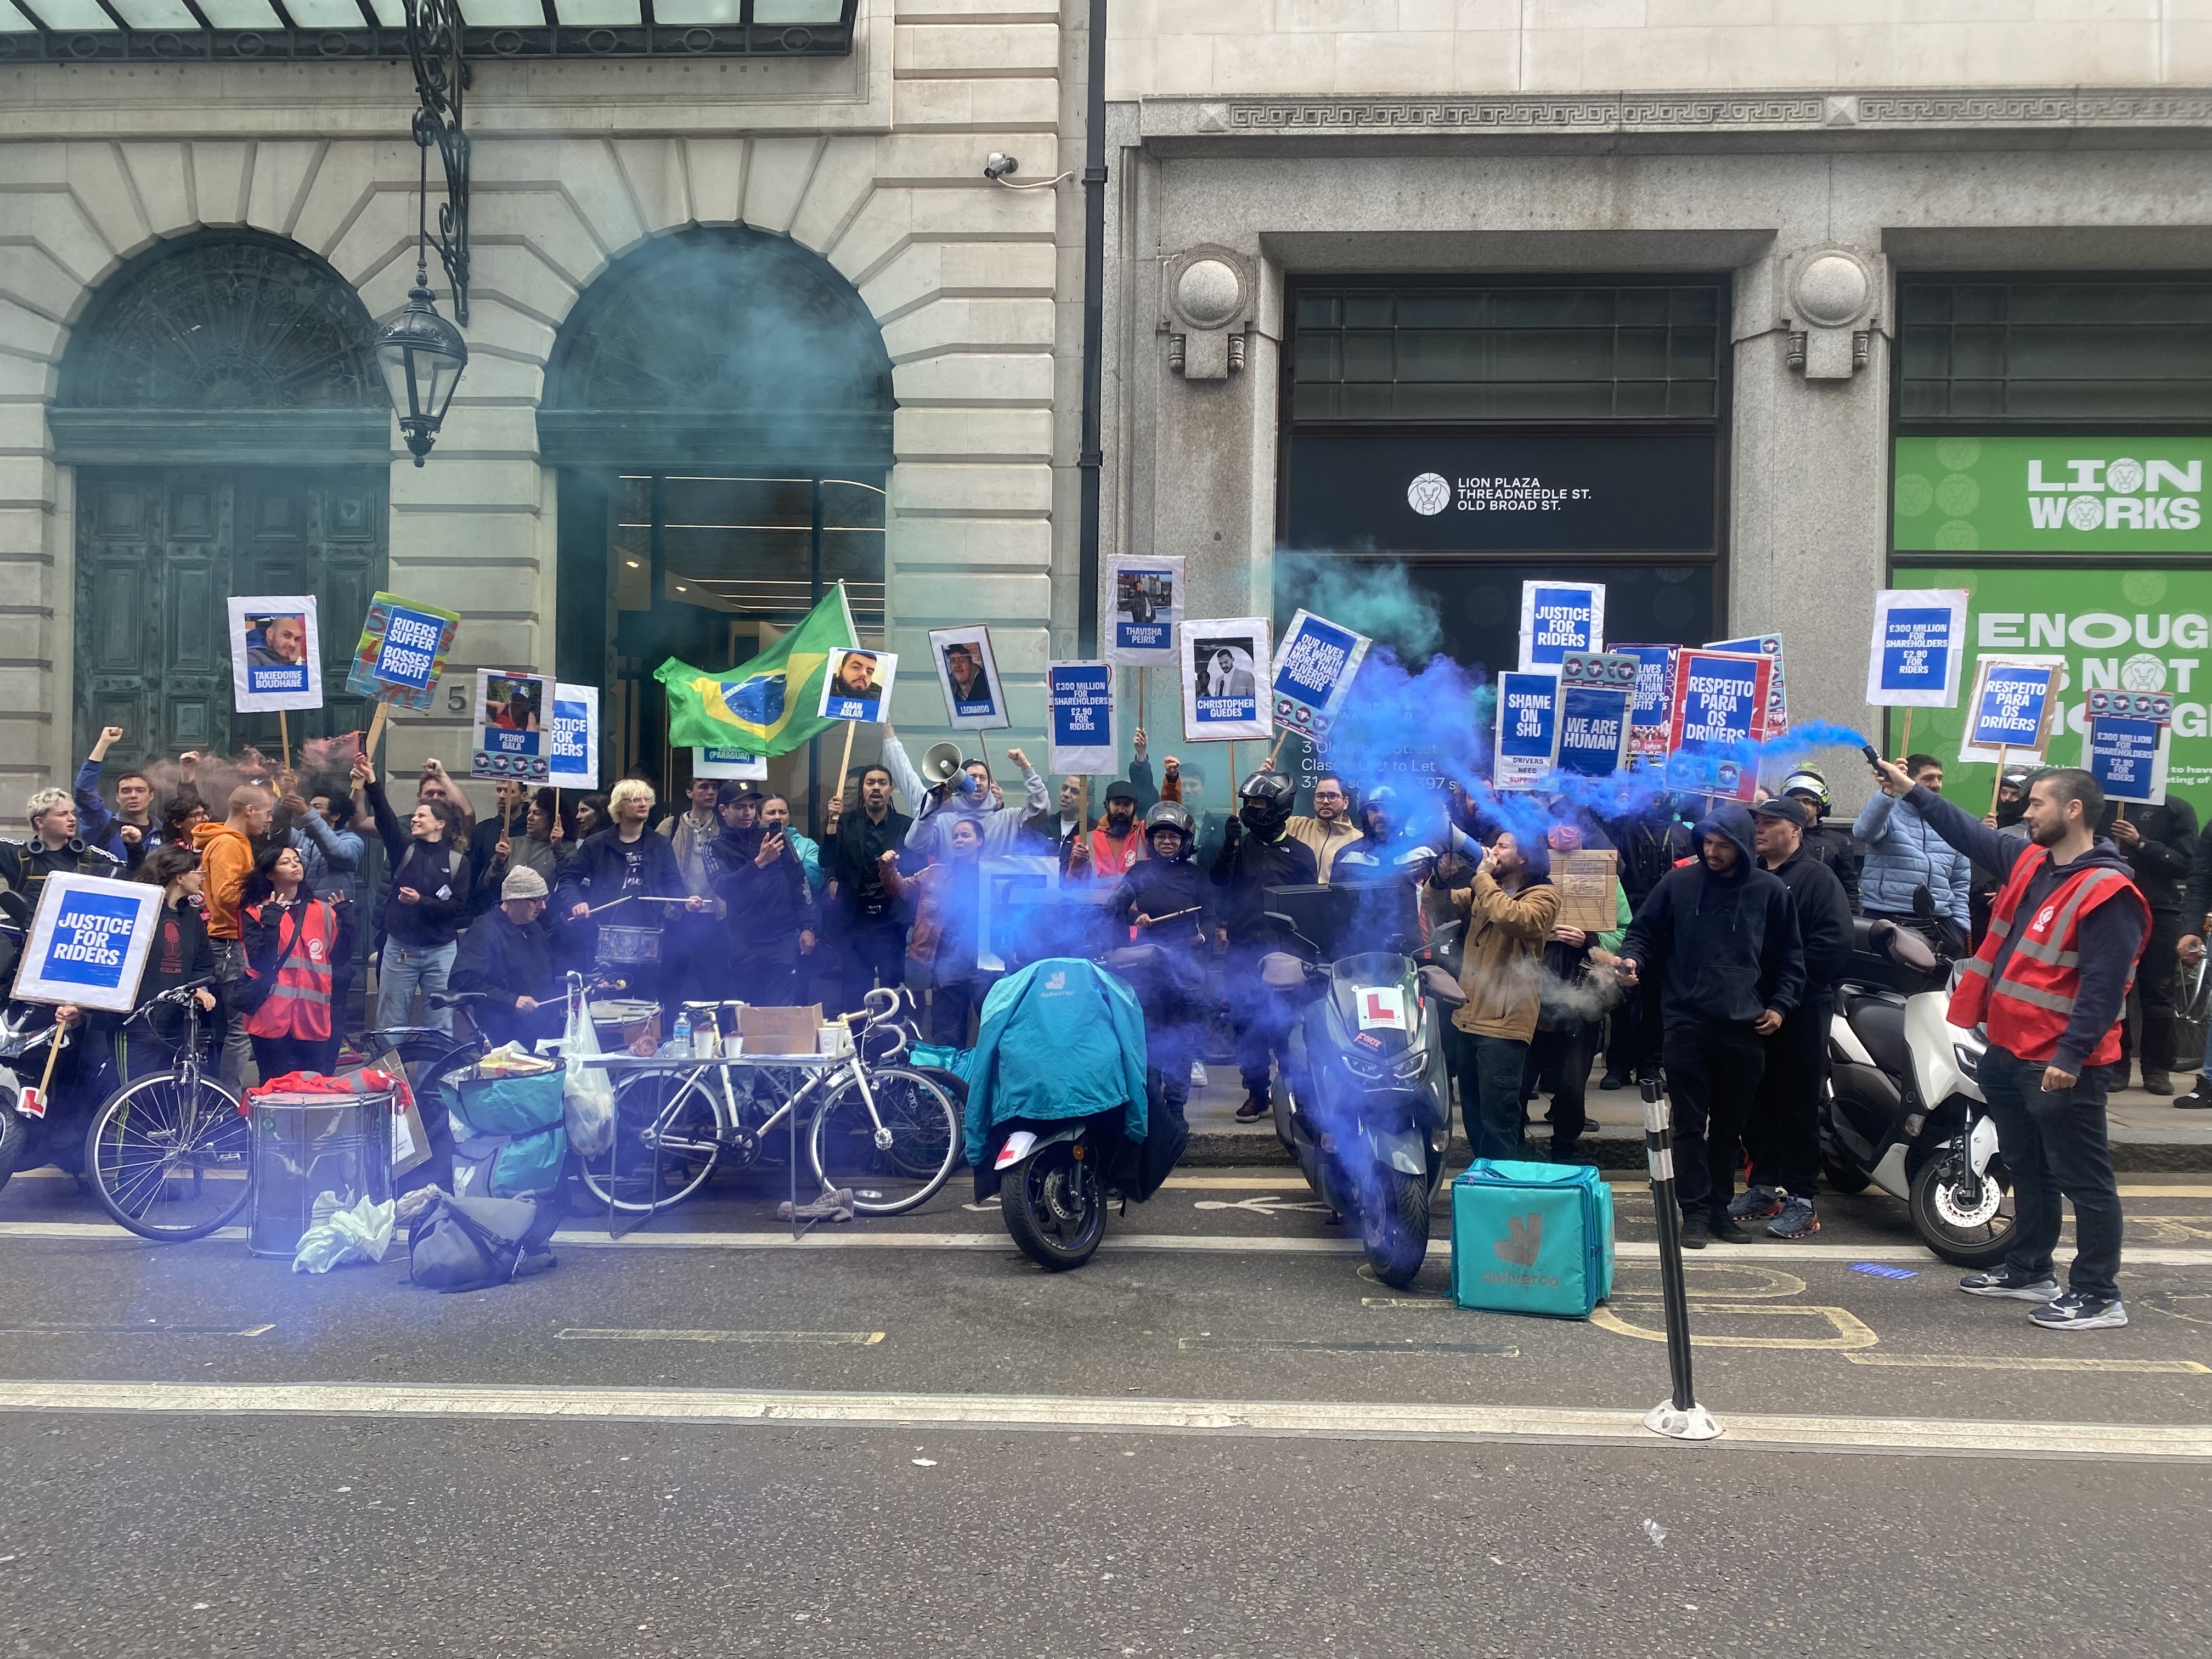 Deliveroo drivers protested outside the offices of London law firm White & Case as the Deliveroo AGM took place inside (Rebecca Speare-Cole/PA)